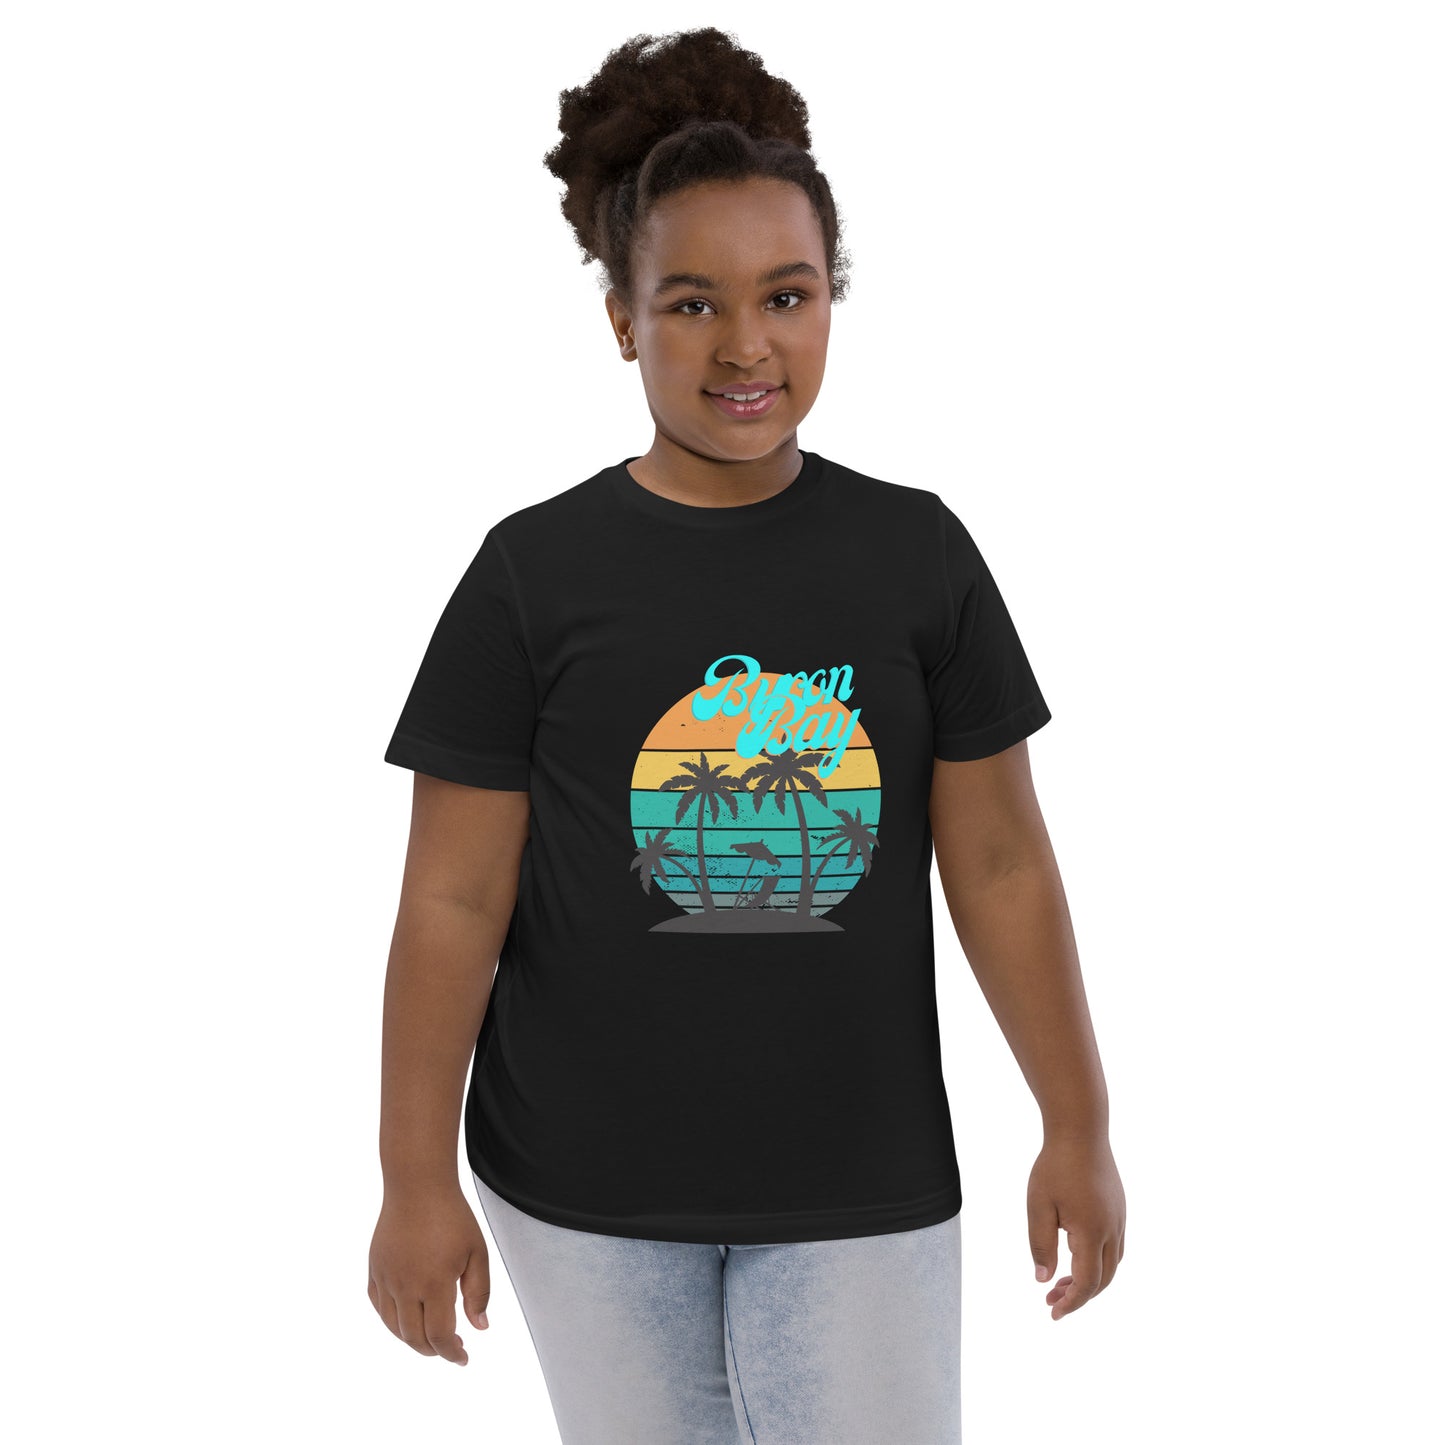  Kids T-Shirt - Black  - Front view, being warn on a girl standing with her arms by her side - Byron Bay design on front - Genuine Byron Bay Merchandise | Produced by Go Sea Kayak Byron Bay 